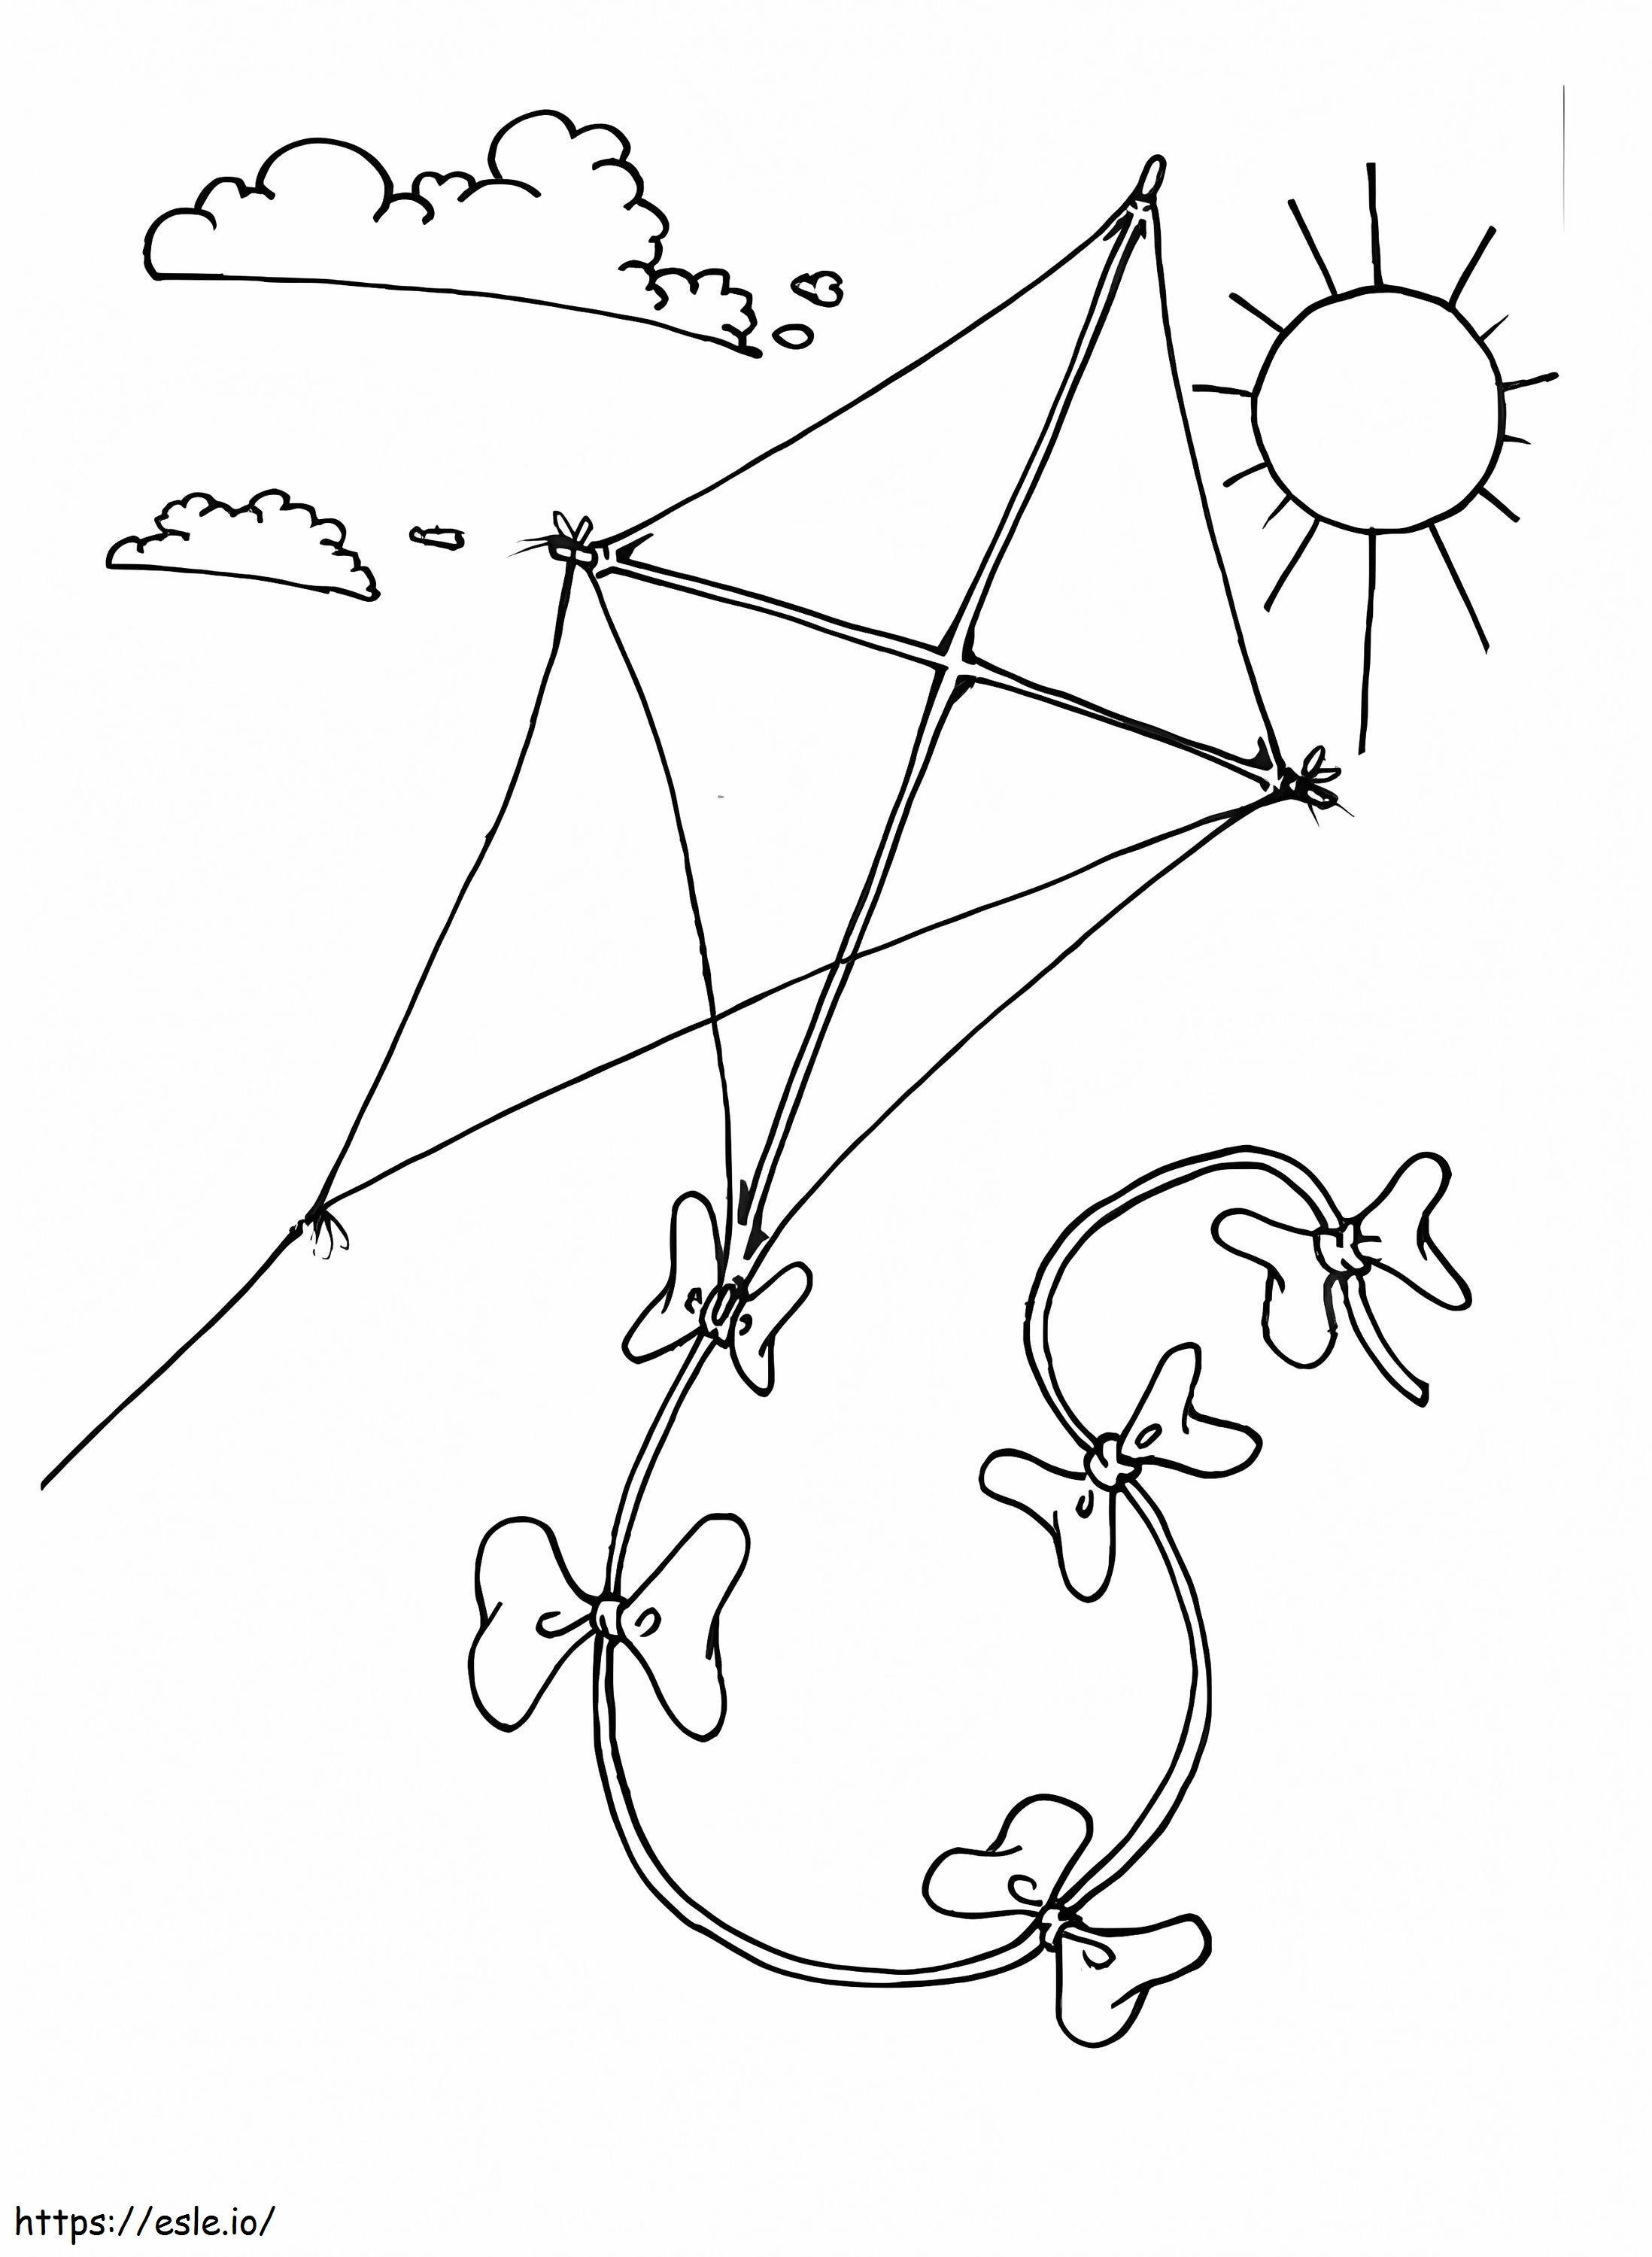 Sun And Kite coloring page